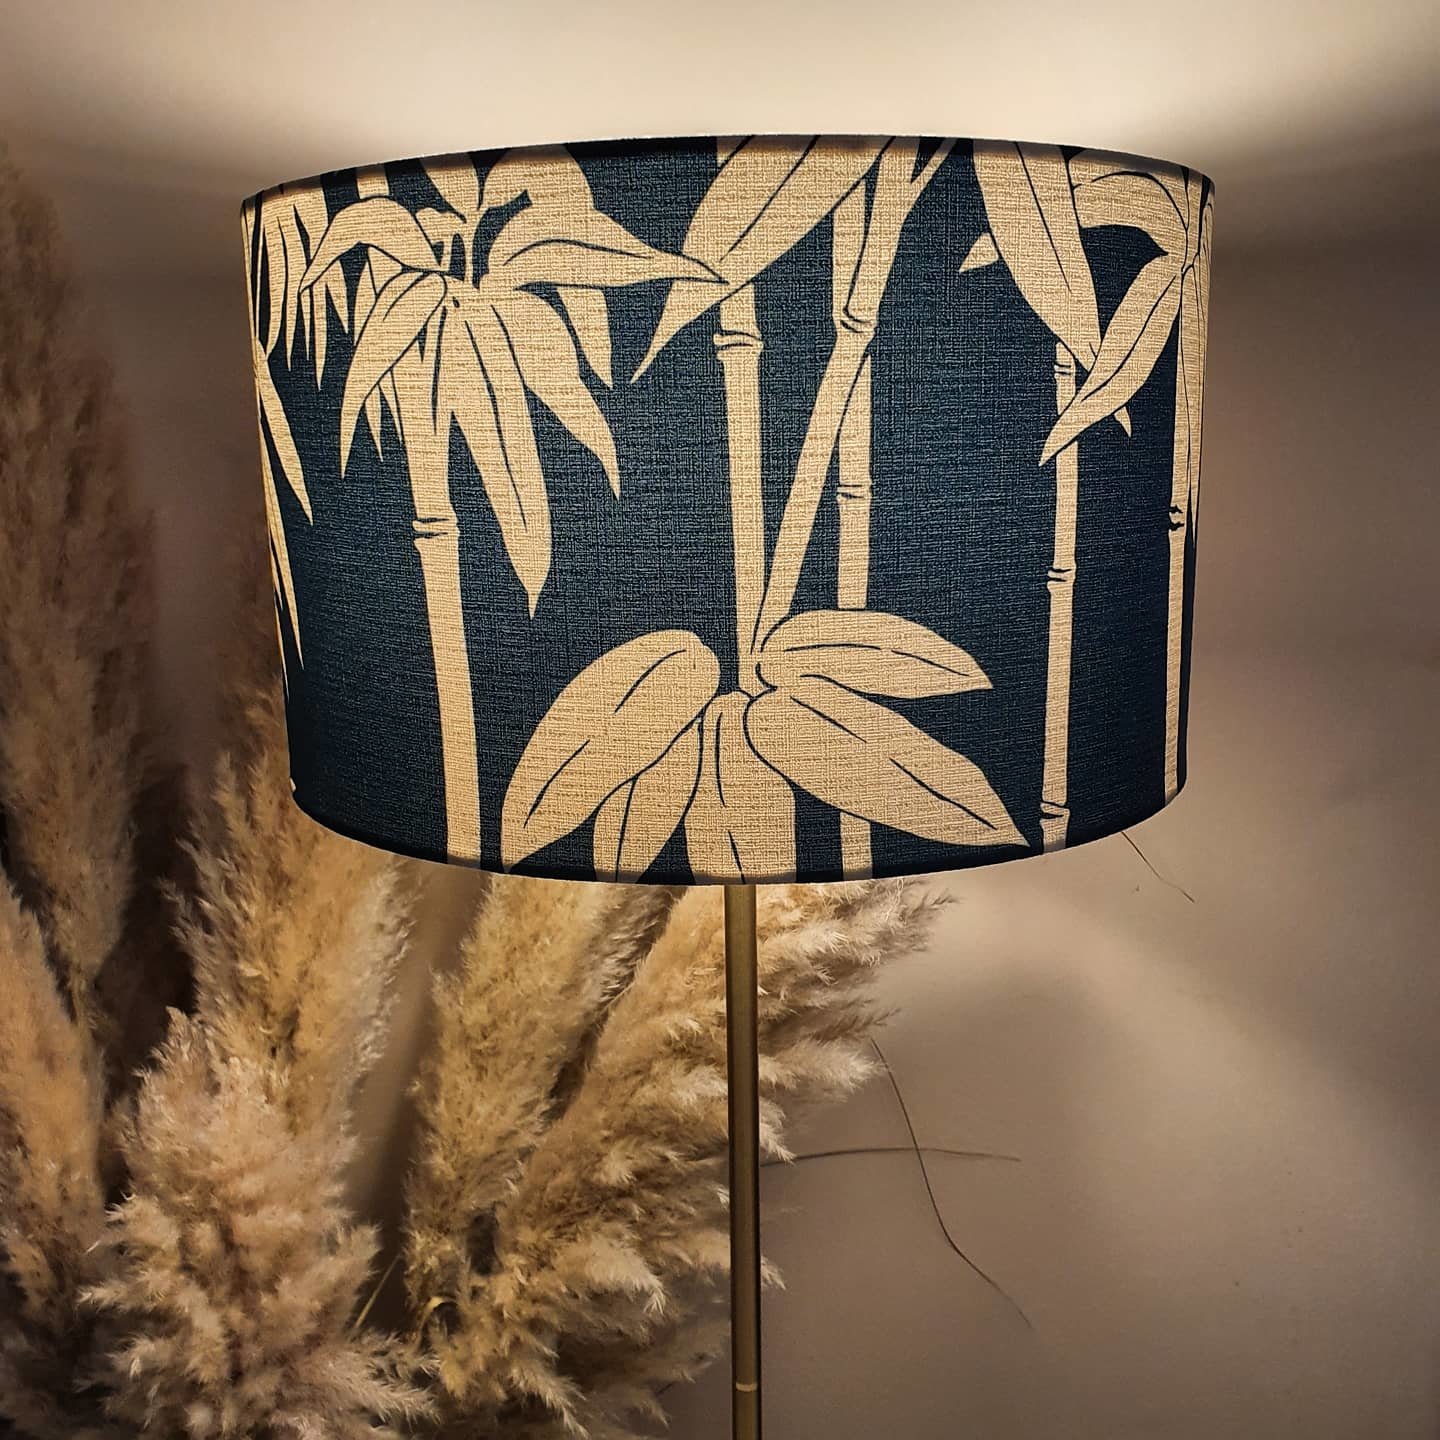 Custom Made Lampshades Australia, Lamp Shades Made To Order Melbourne